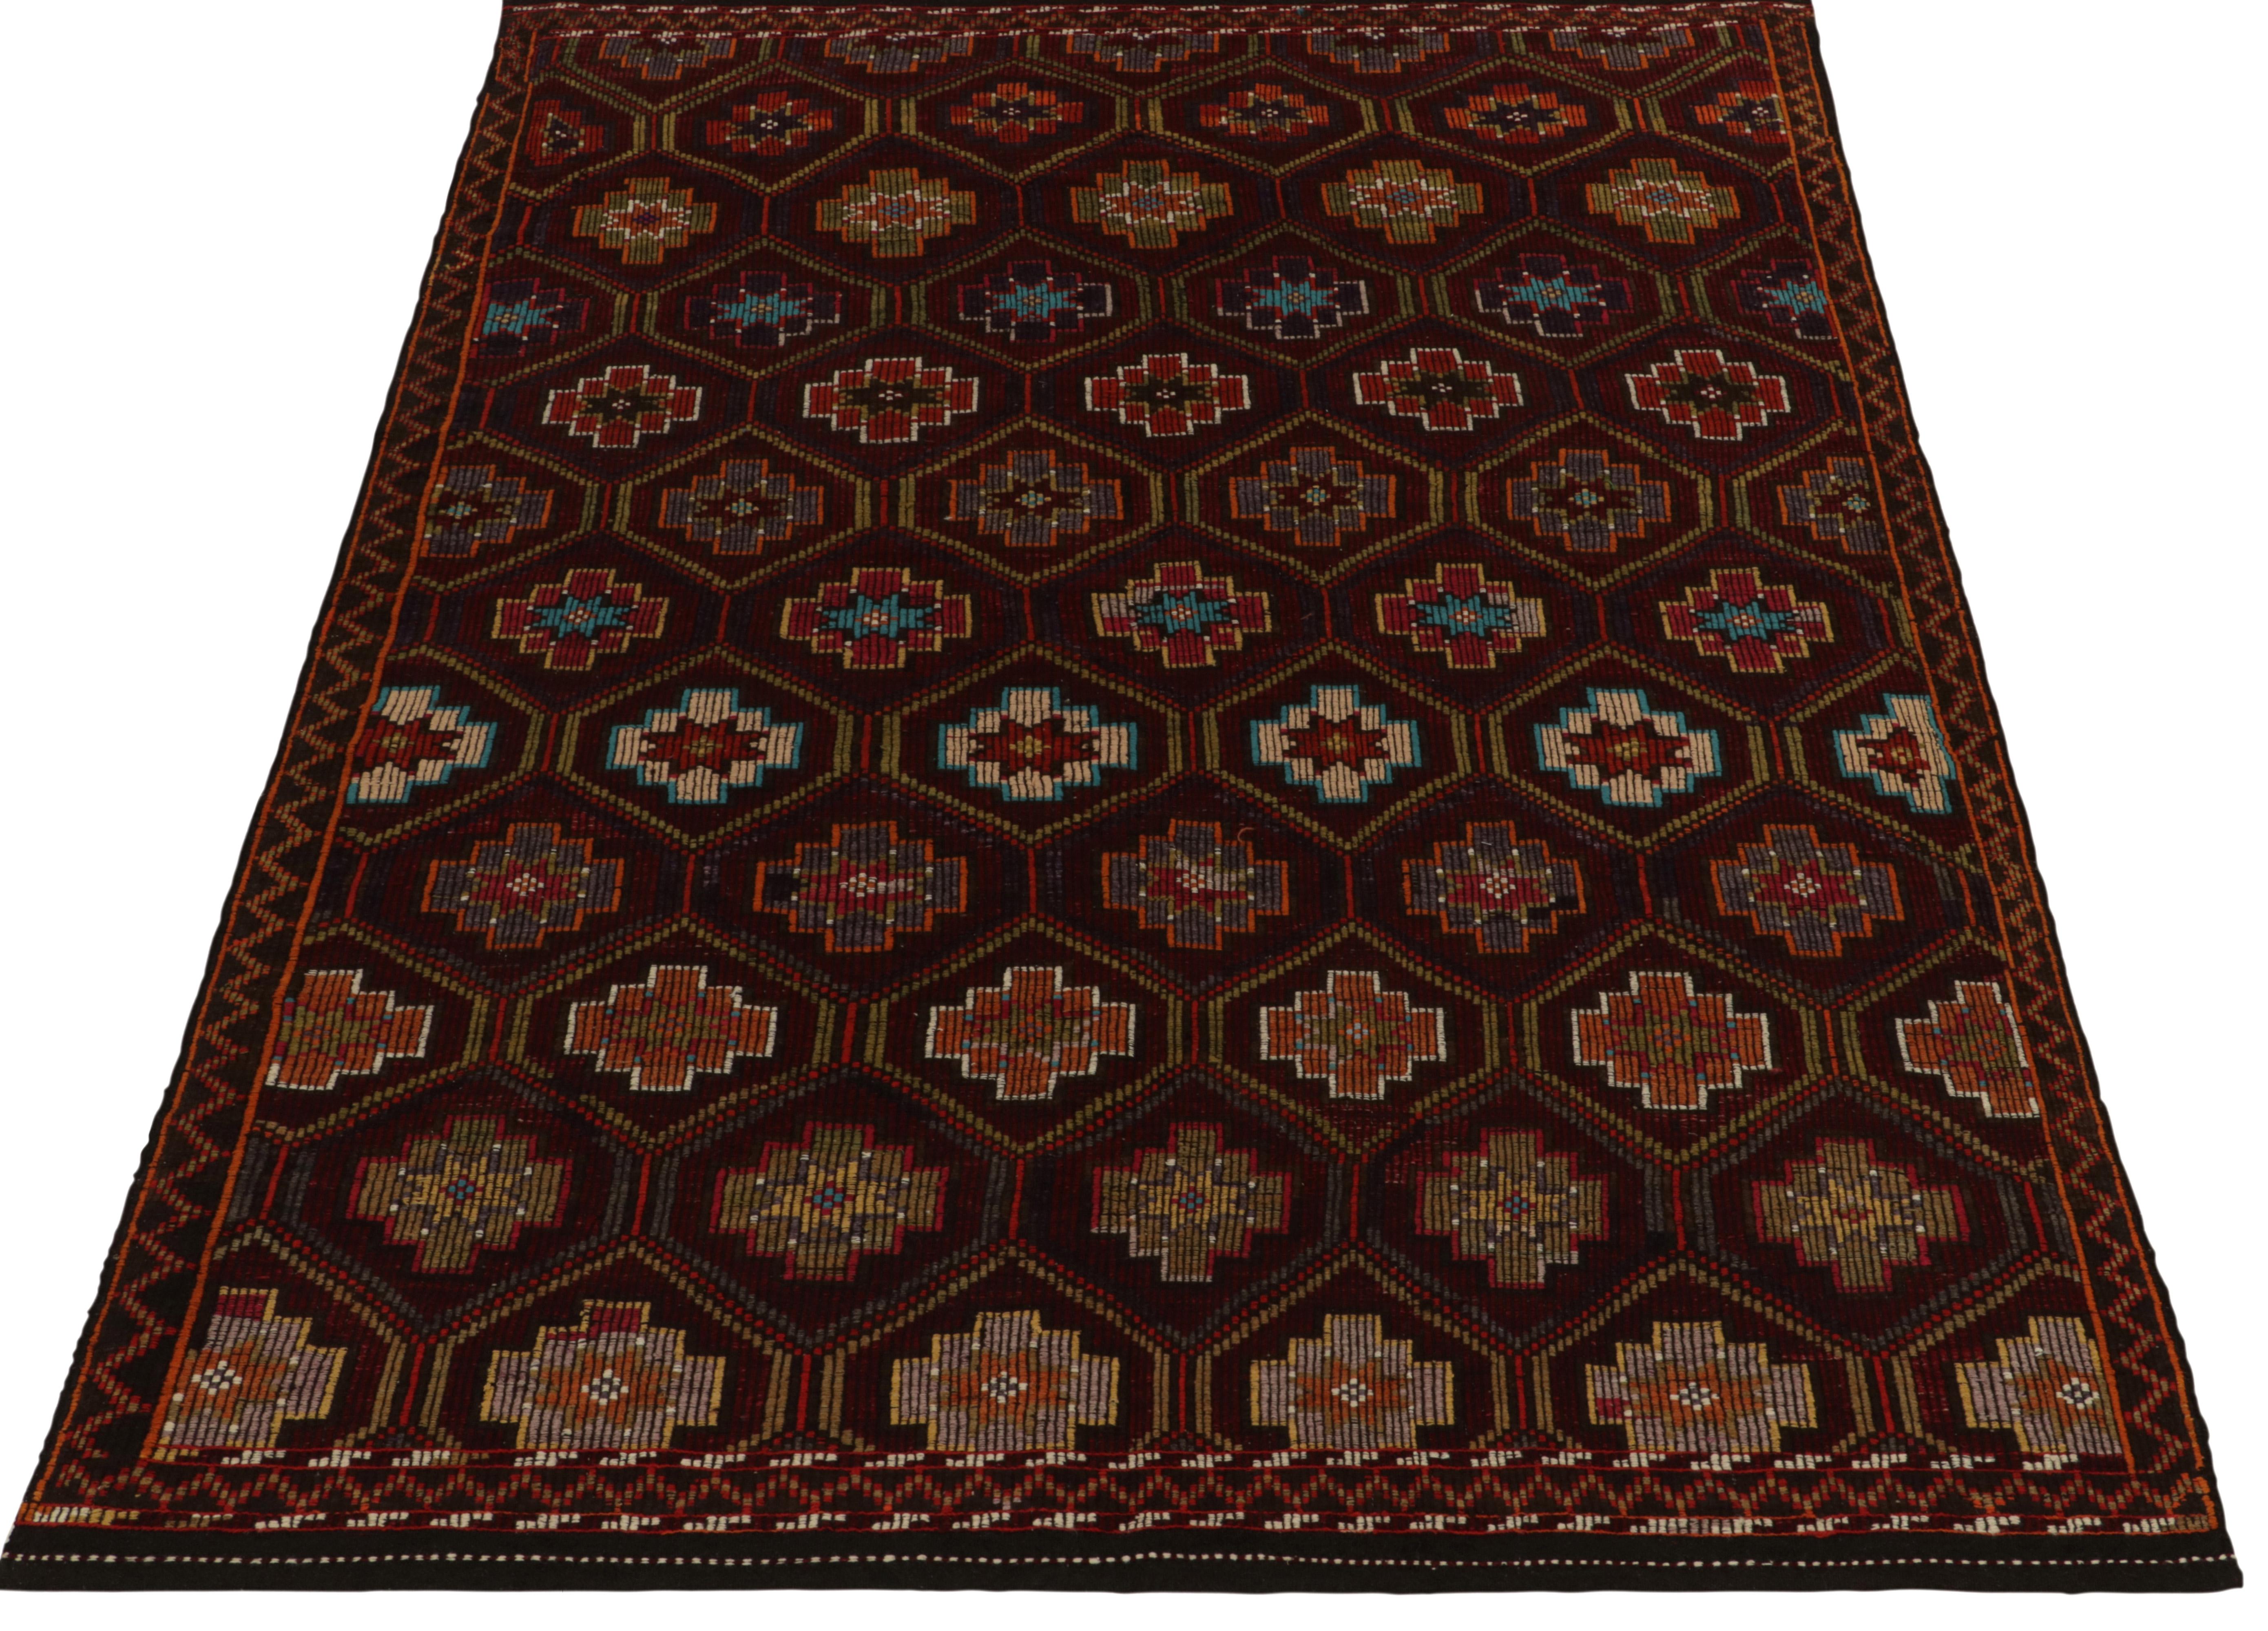 Carrying rich Kurdish inspiration, a vintage Cecim kilim entering our coveted classic flat weave collection. This 7x10 rug from Turkey revels in impeccable embroidery & detailing in design. 

Reading on the tribal sensibilities of the 1950s, the